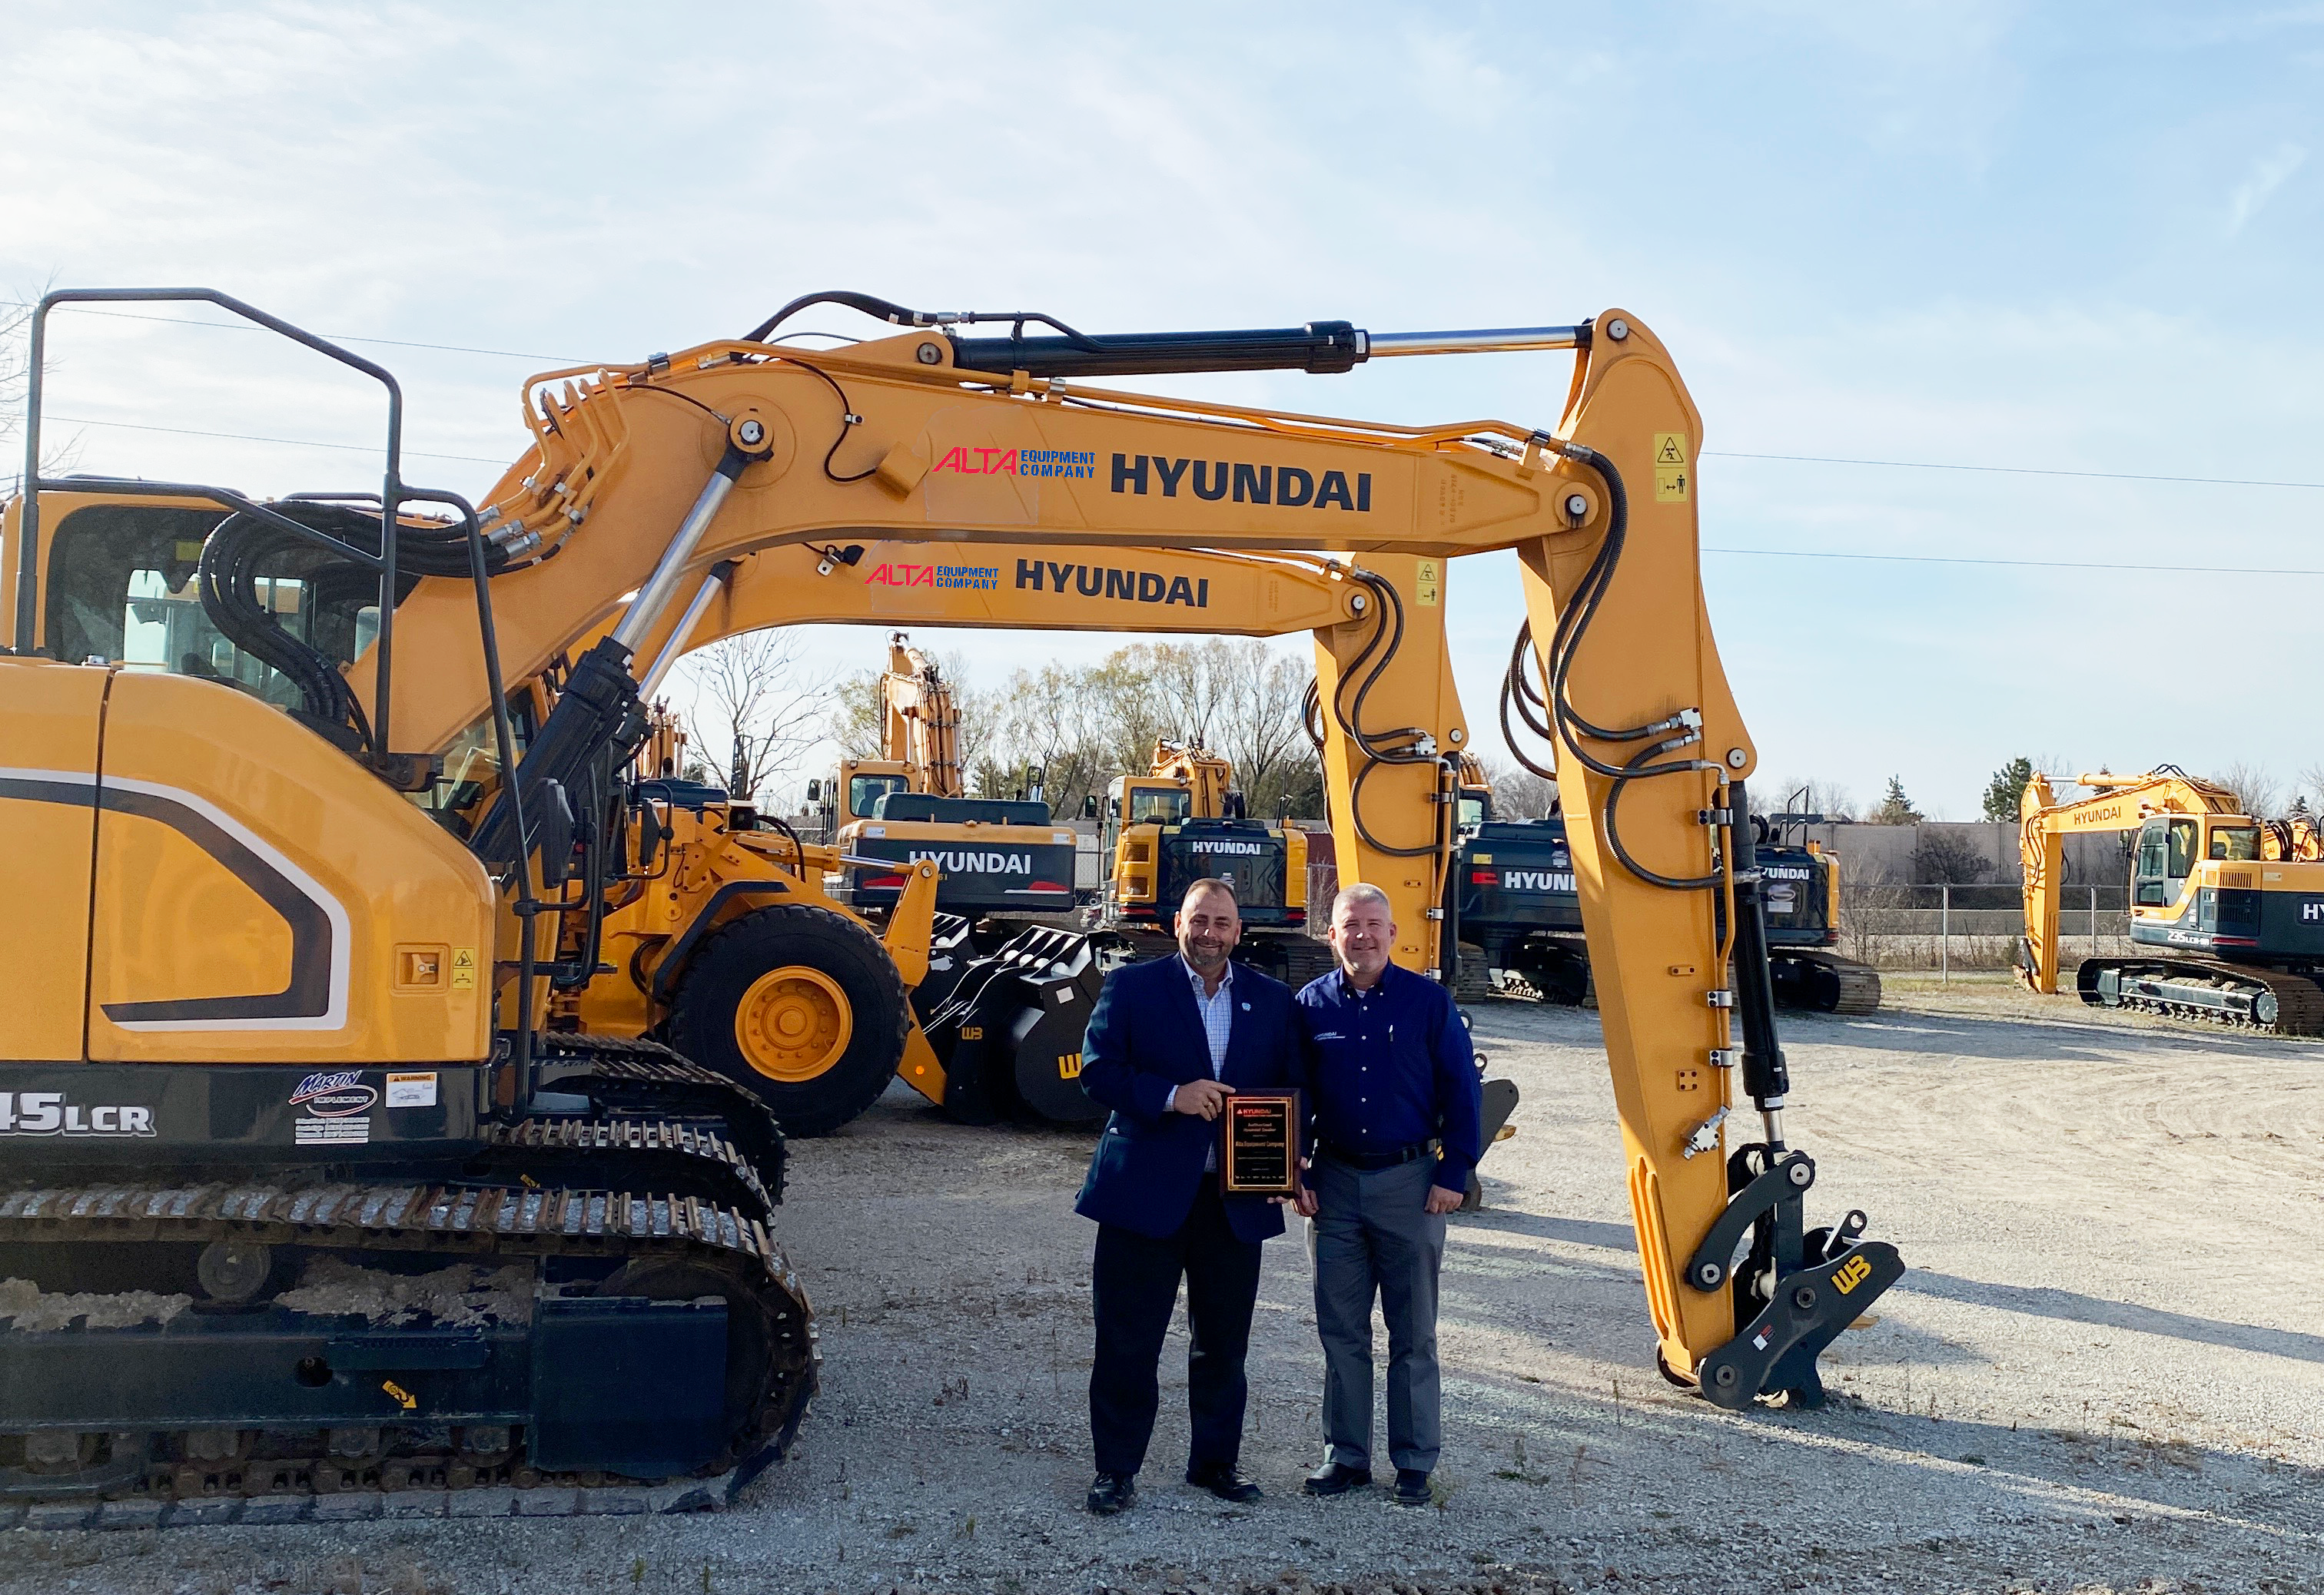 Mike Dahlen and Ed Harseim standing in front of Hyundai construction equipment